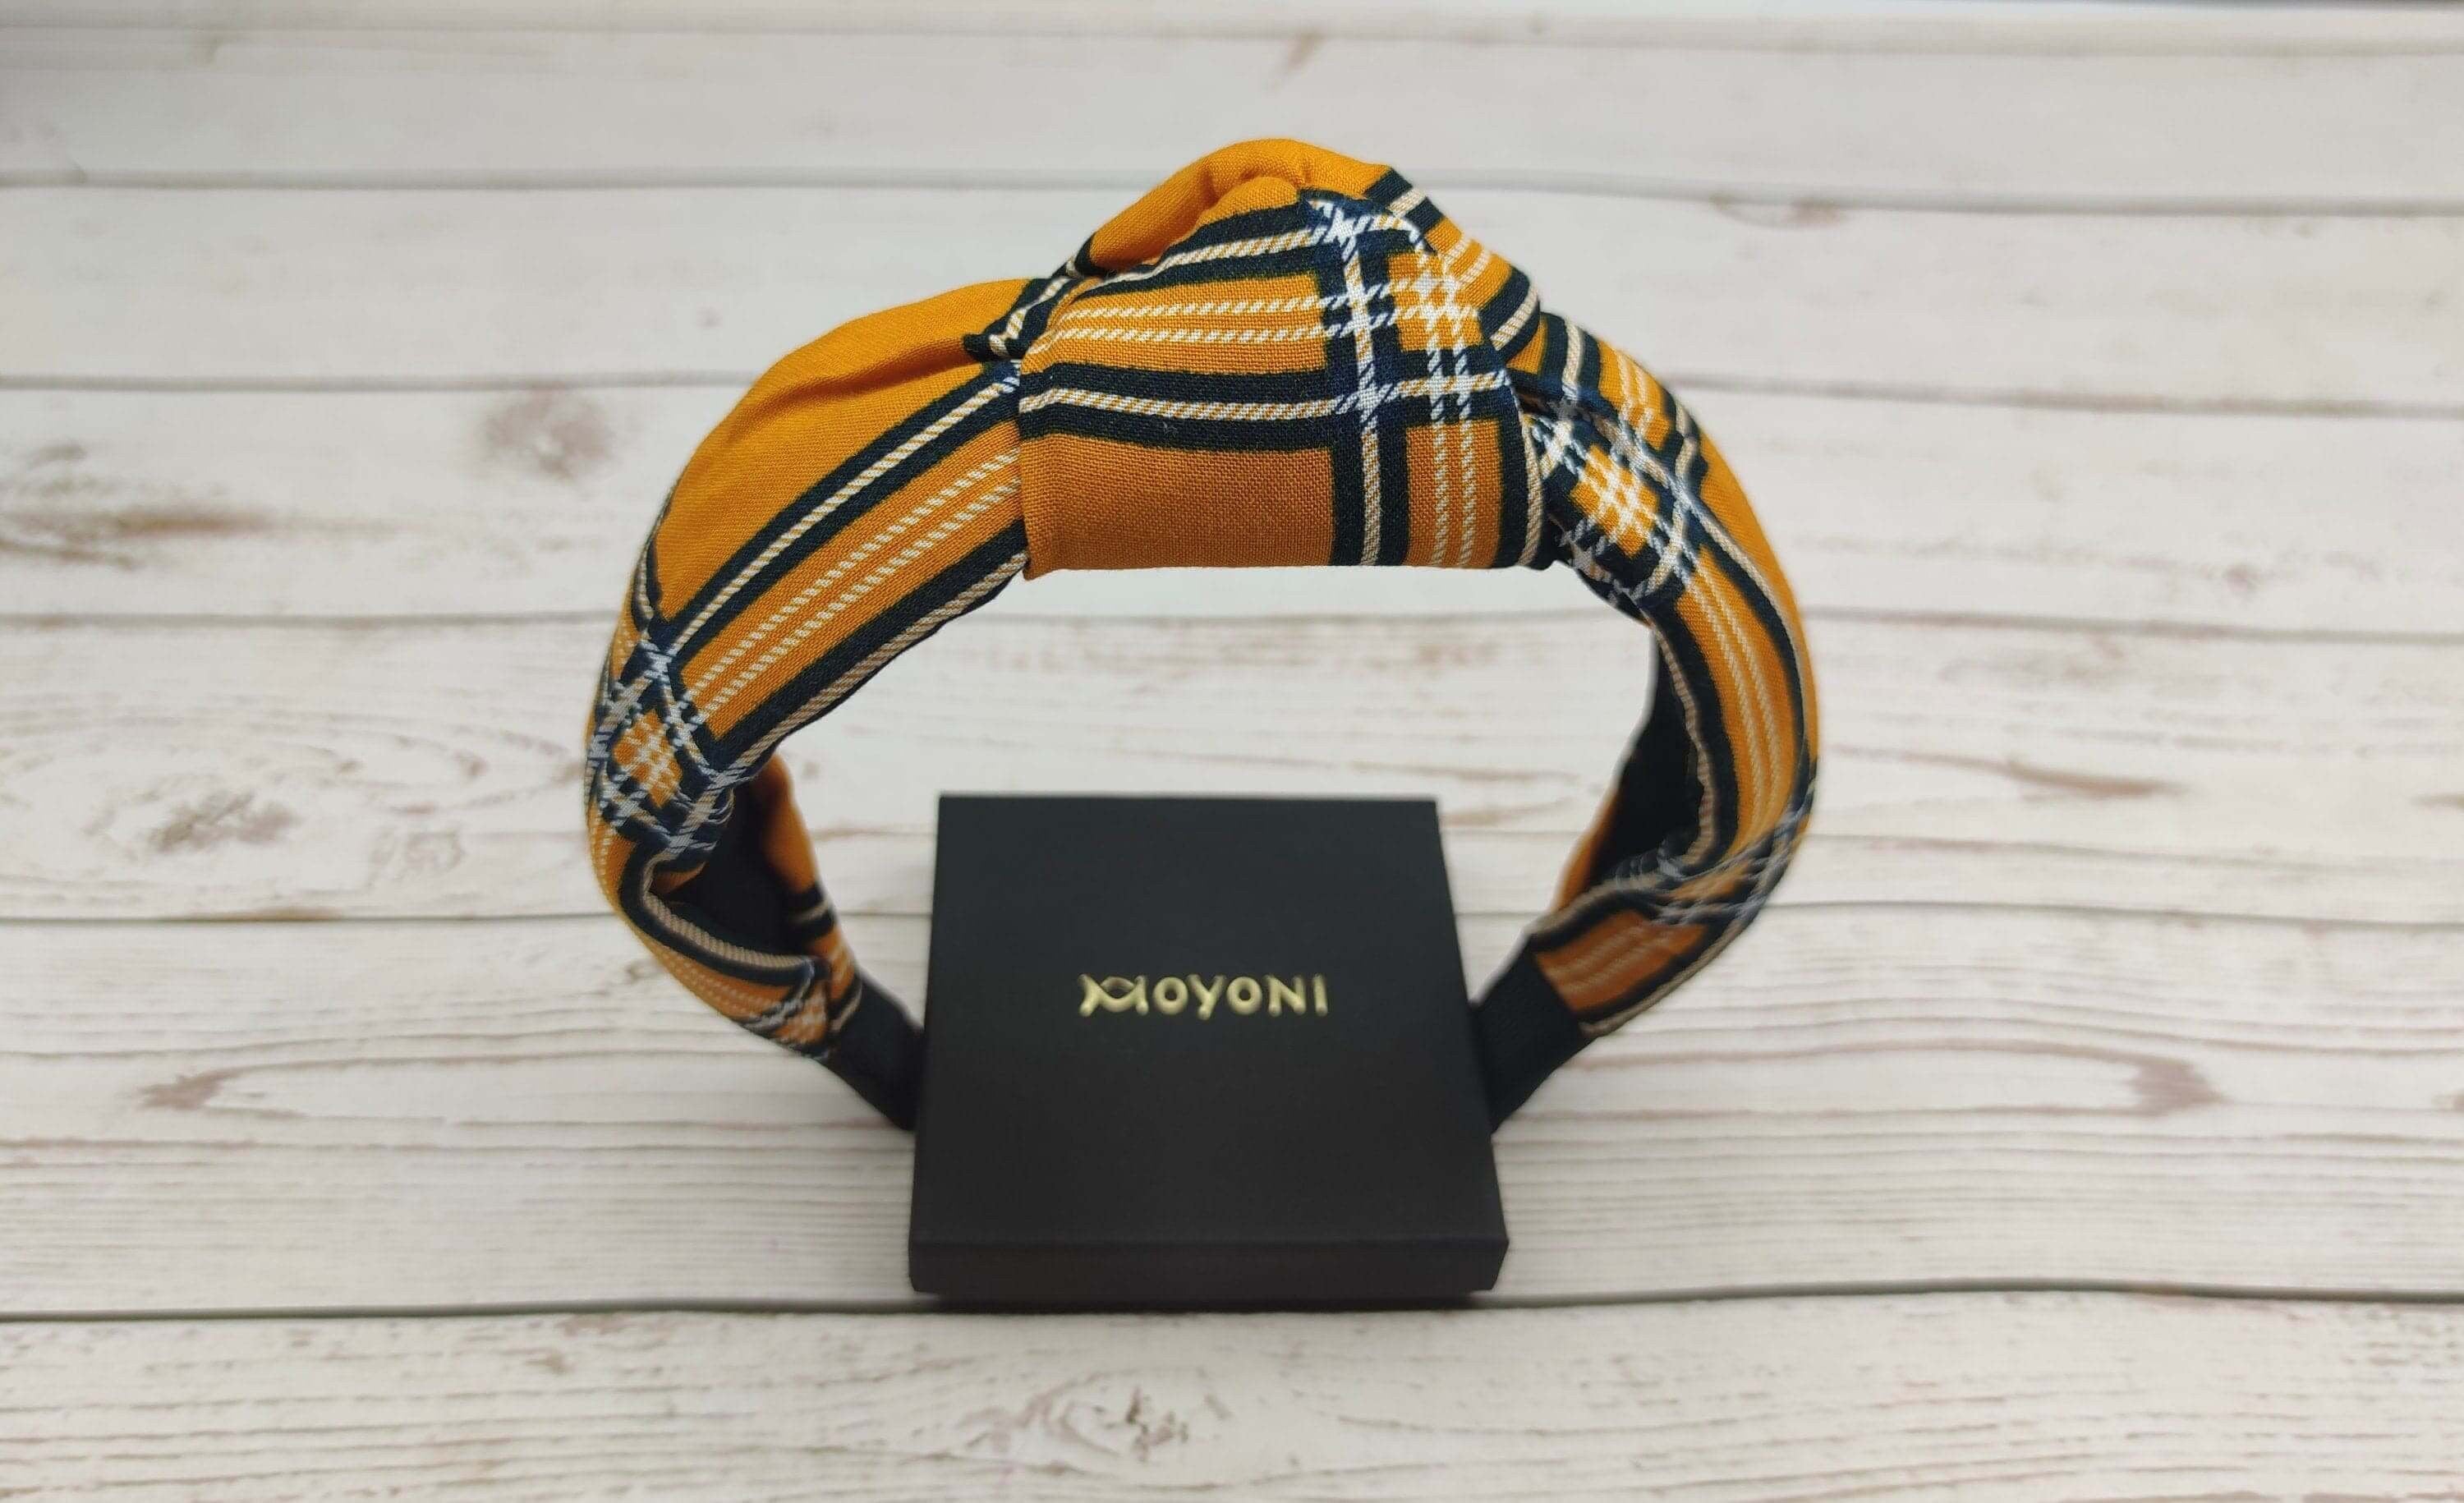 Keep your hair looking neat and tidy with our wide range of headbands. From simple ties to stylish silk headbands, we have got the perfect accessory for you.